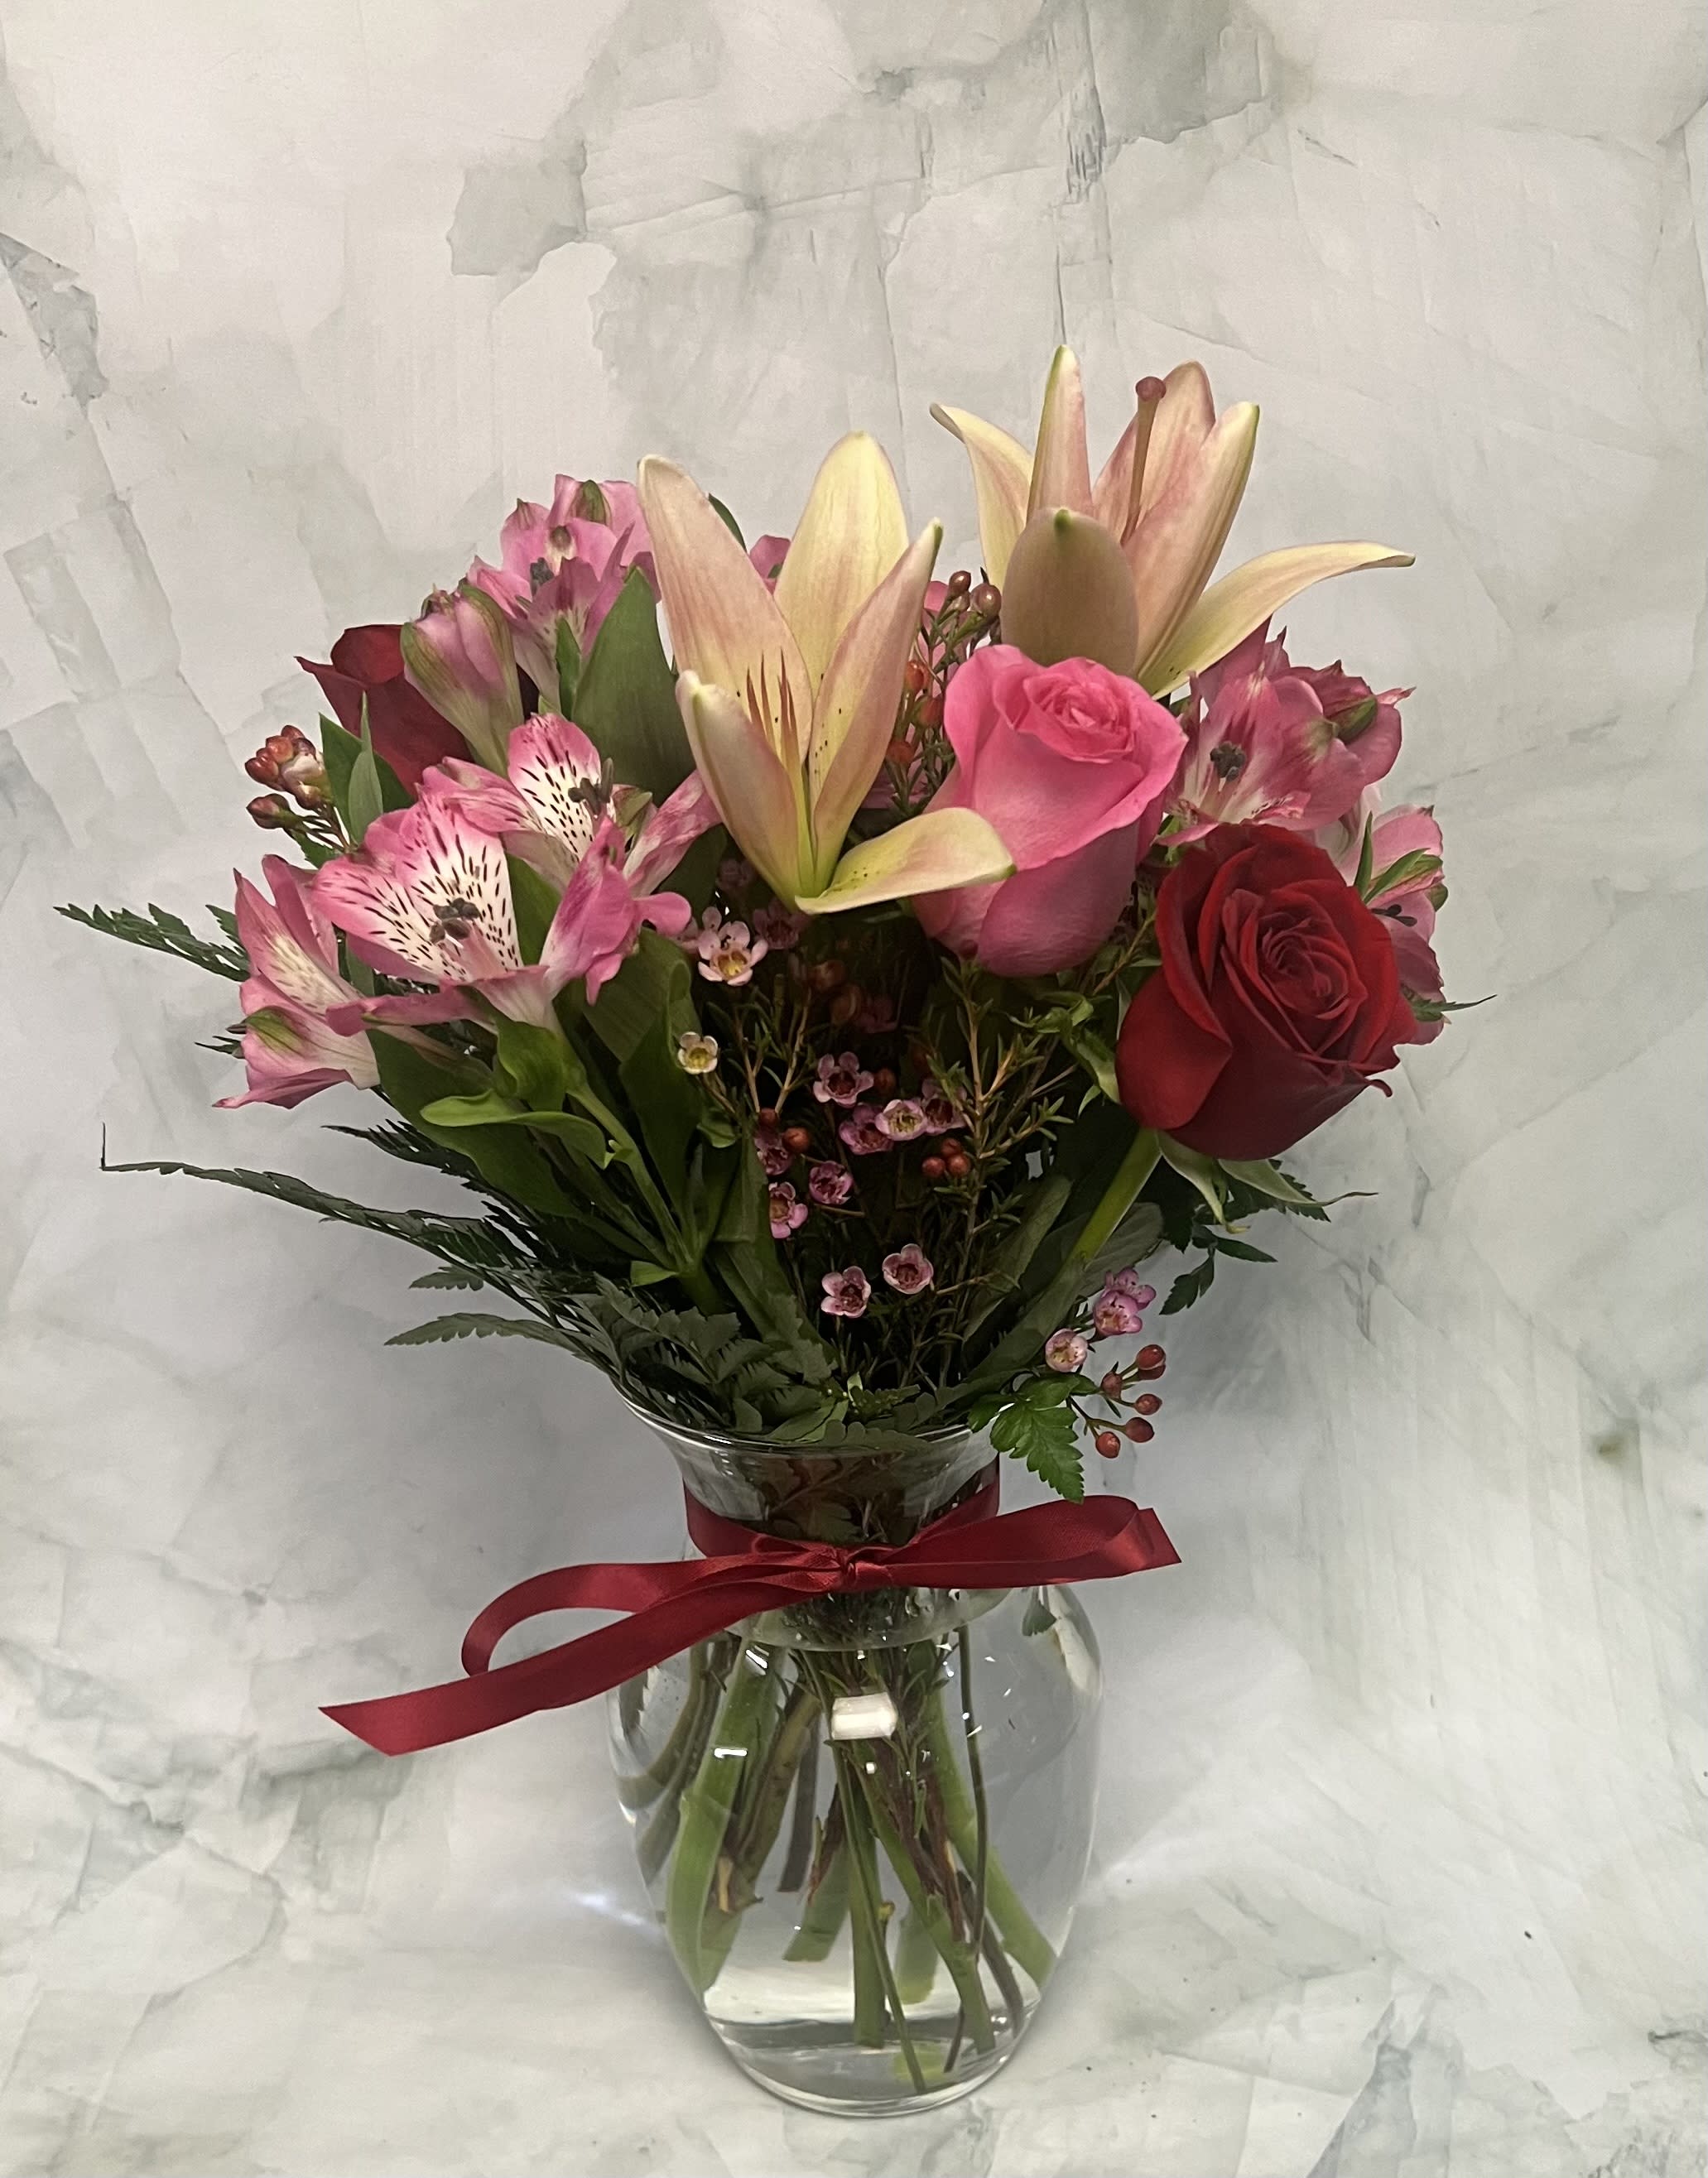 Loving Lilies and Romantic Roses - This arrangement is the perfect symbol of love. This includes pink Lilies, Peruvian Lilies, red Roses and pink Roses with a touch of pink Wax flower that ties the whole arrangement together. Whether it is for an anniversary or a just because occasion, this arrangement is the perfect combination of love and romance. 